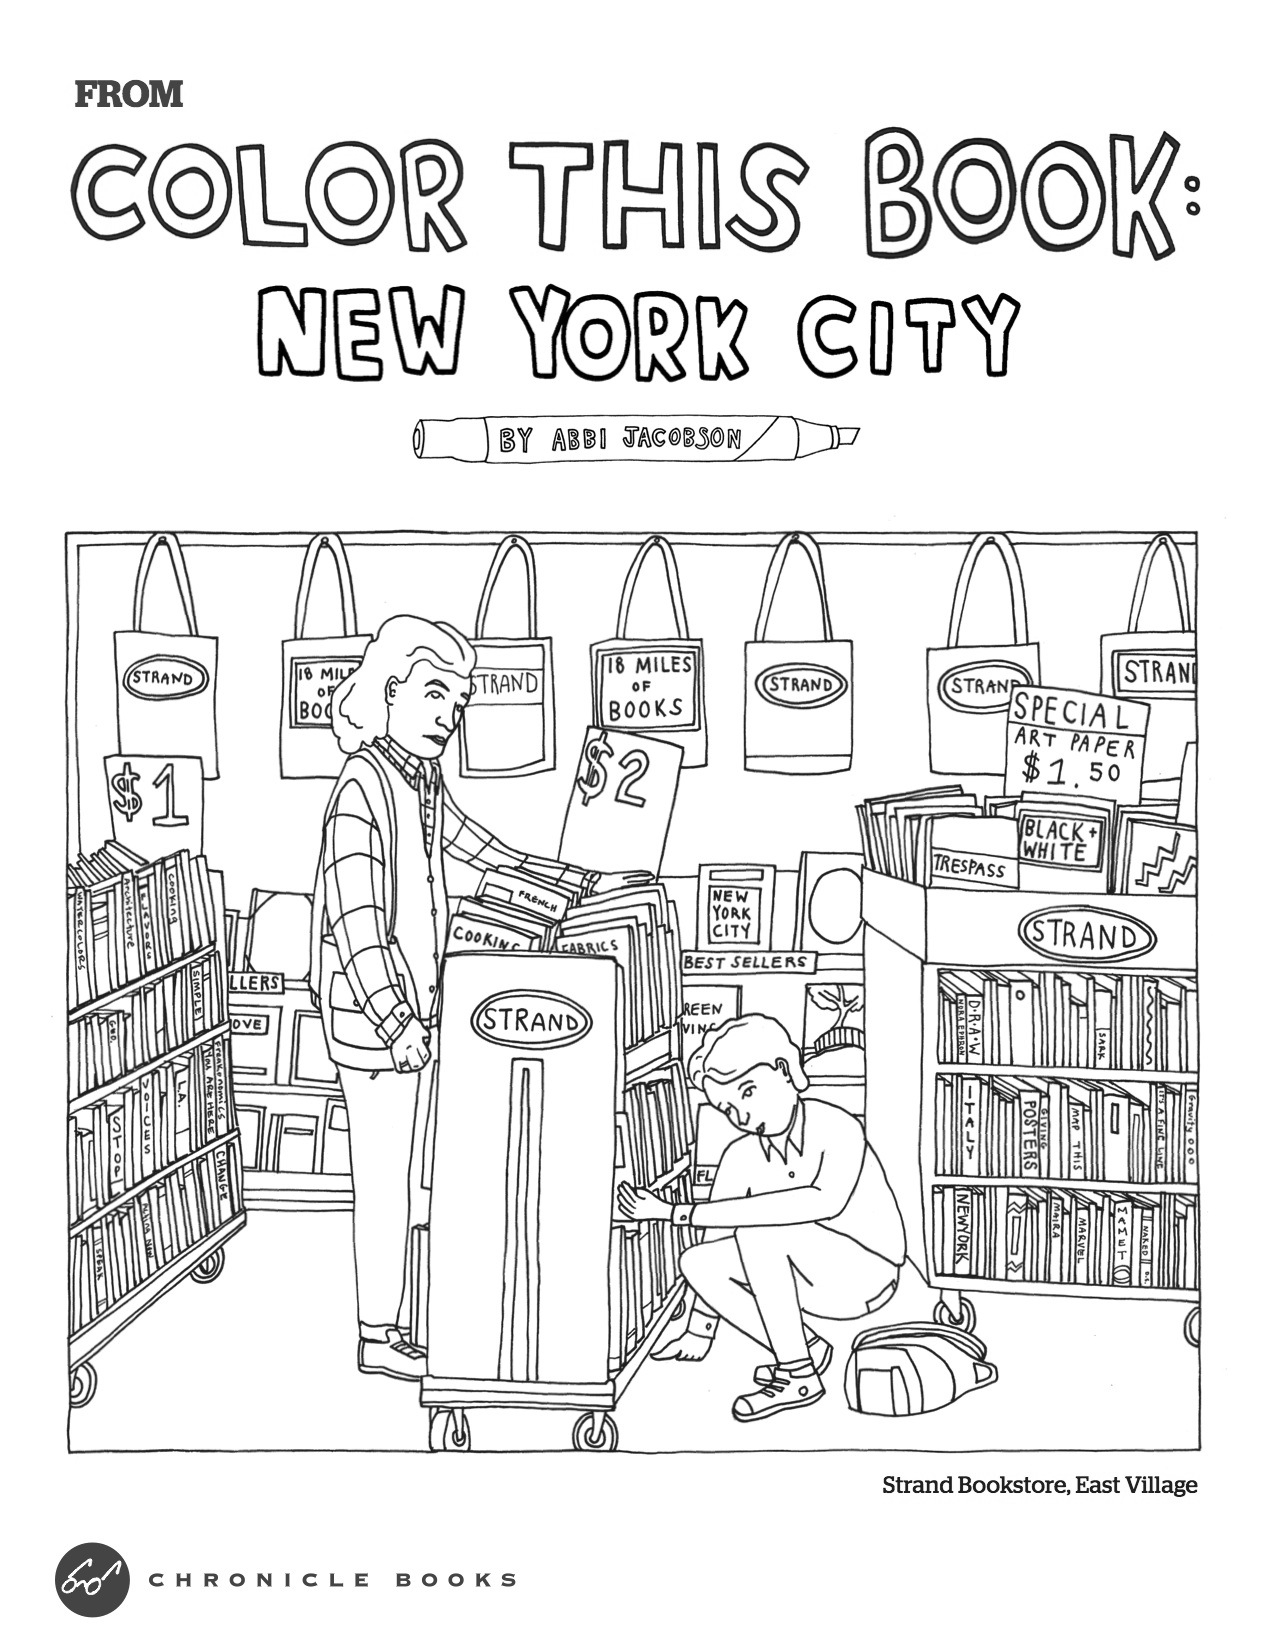 Skyline Coloring Pages Coloring Books And Pages Amazing City Colorings For Adults Picture